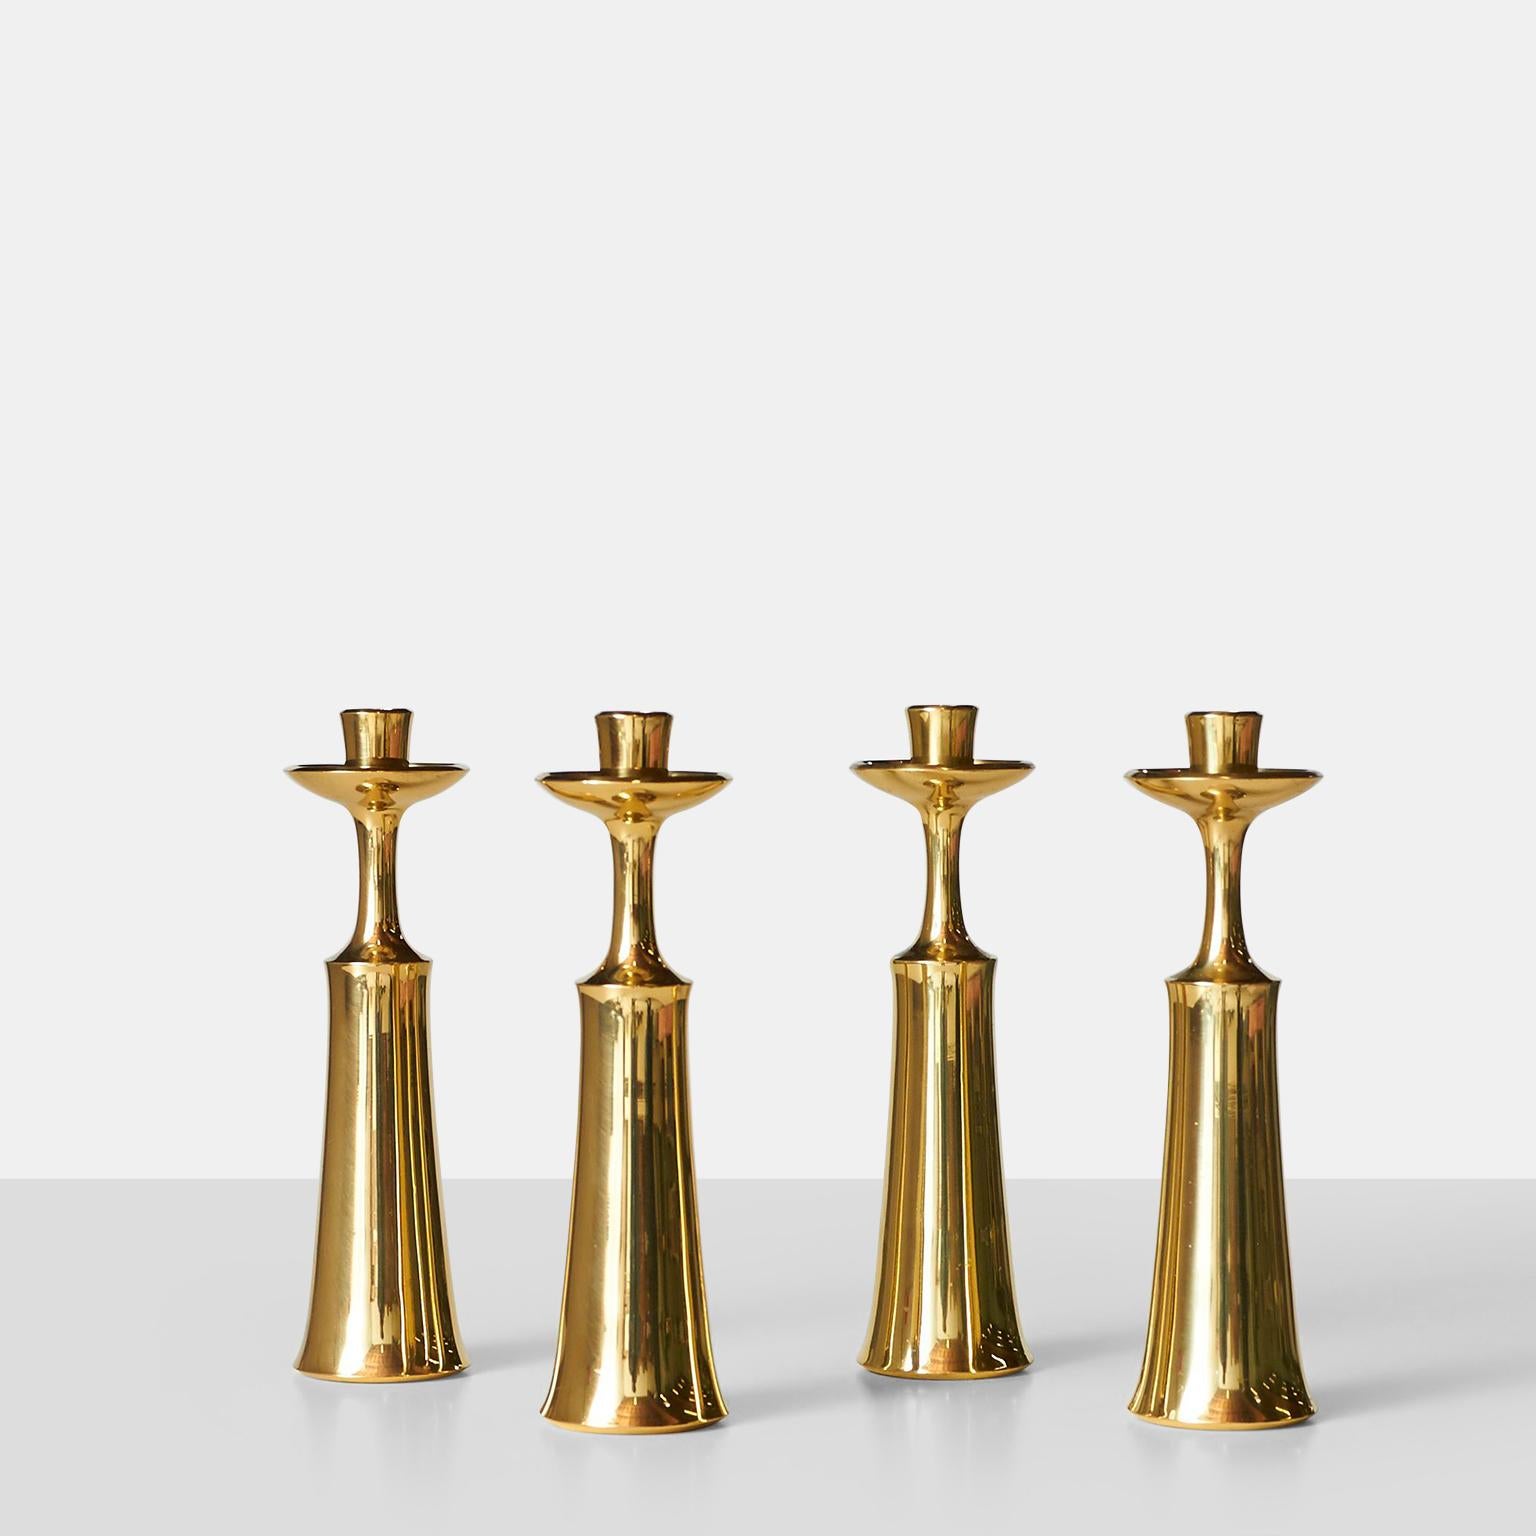 Candlesticks made of brass and stamped accordingly.

Priced per pair and two pairs are available.